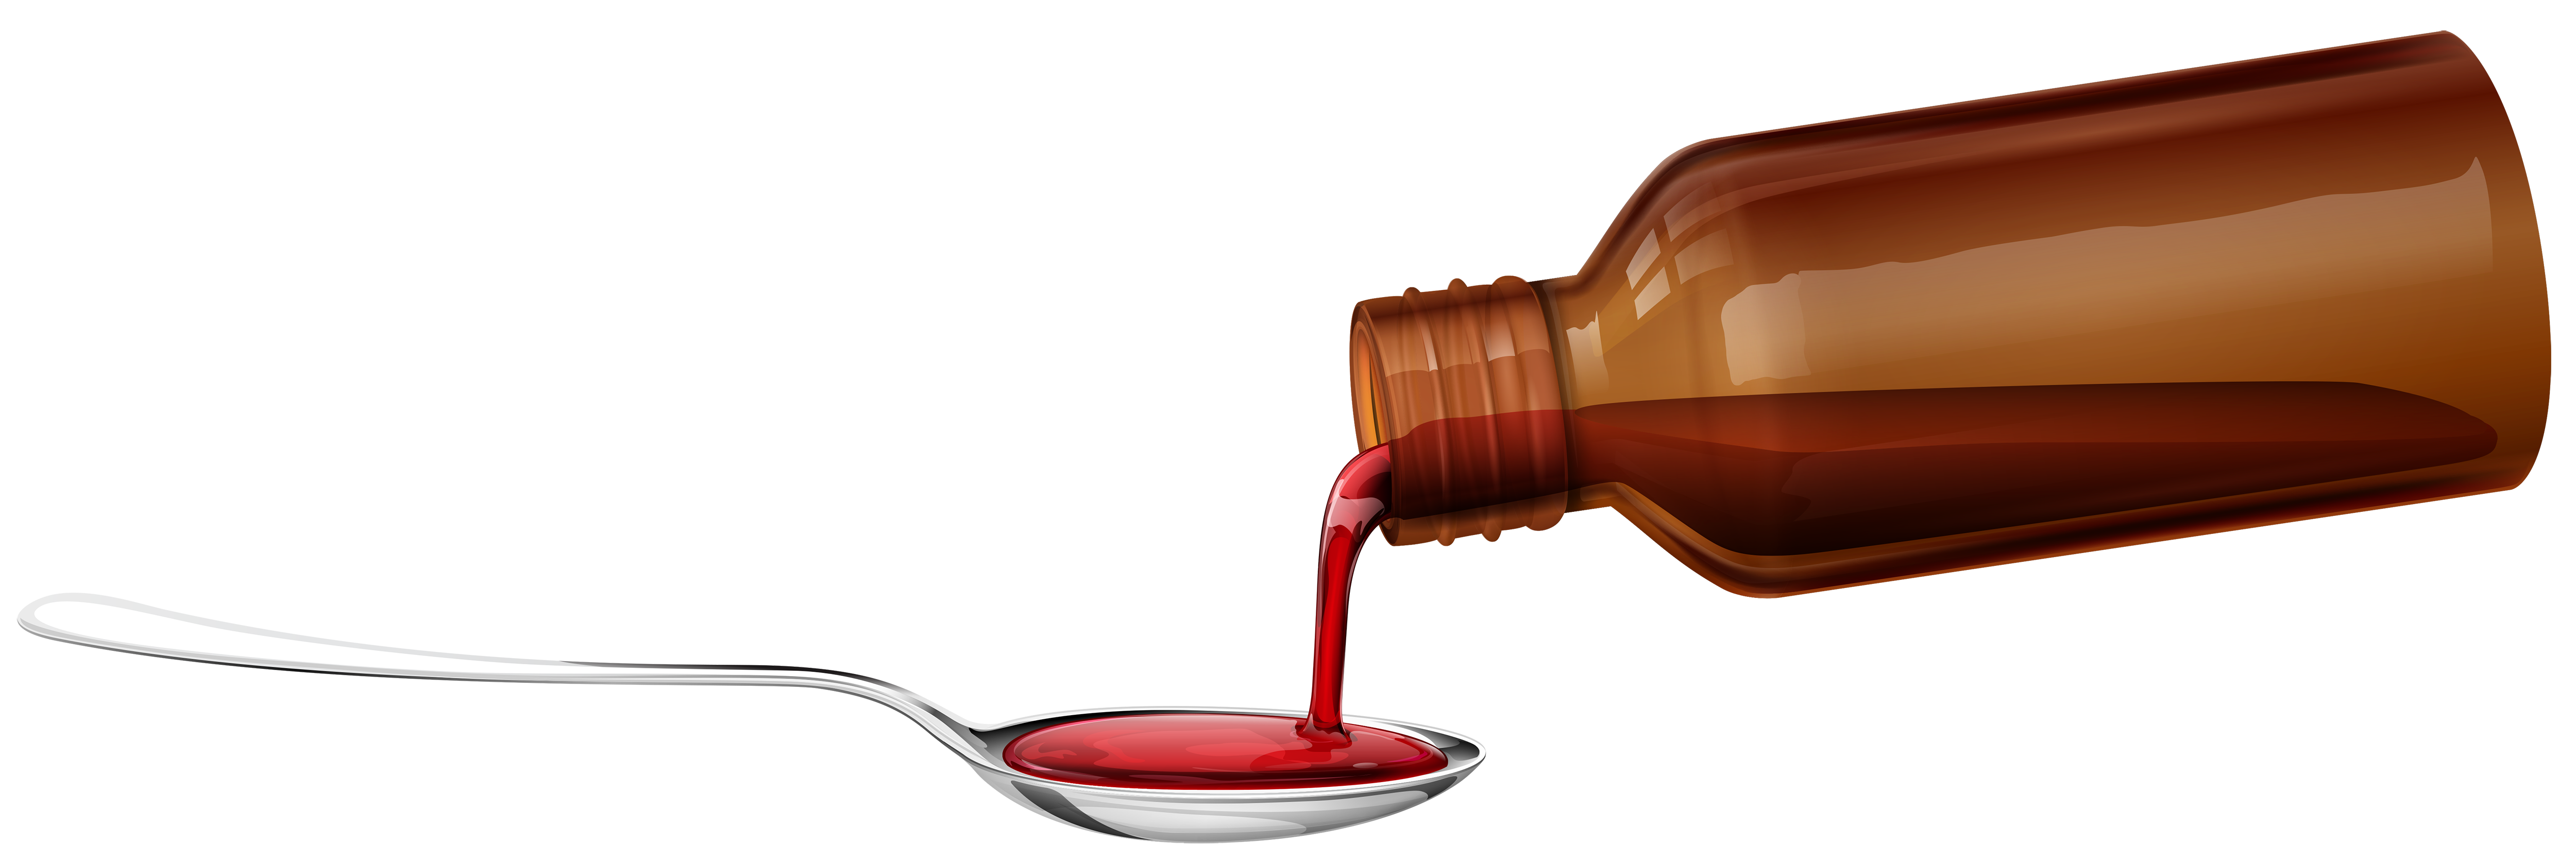 Medical Syrup and Spoon PNG Clipart